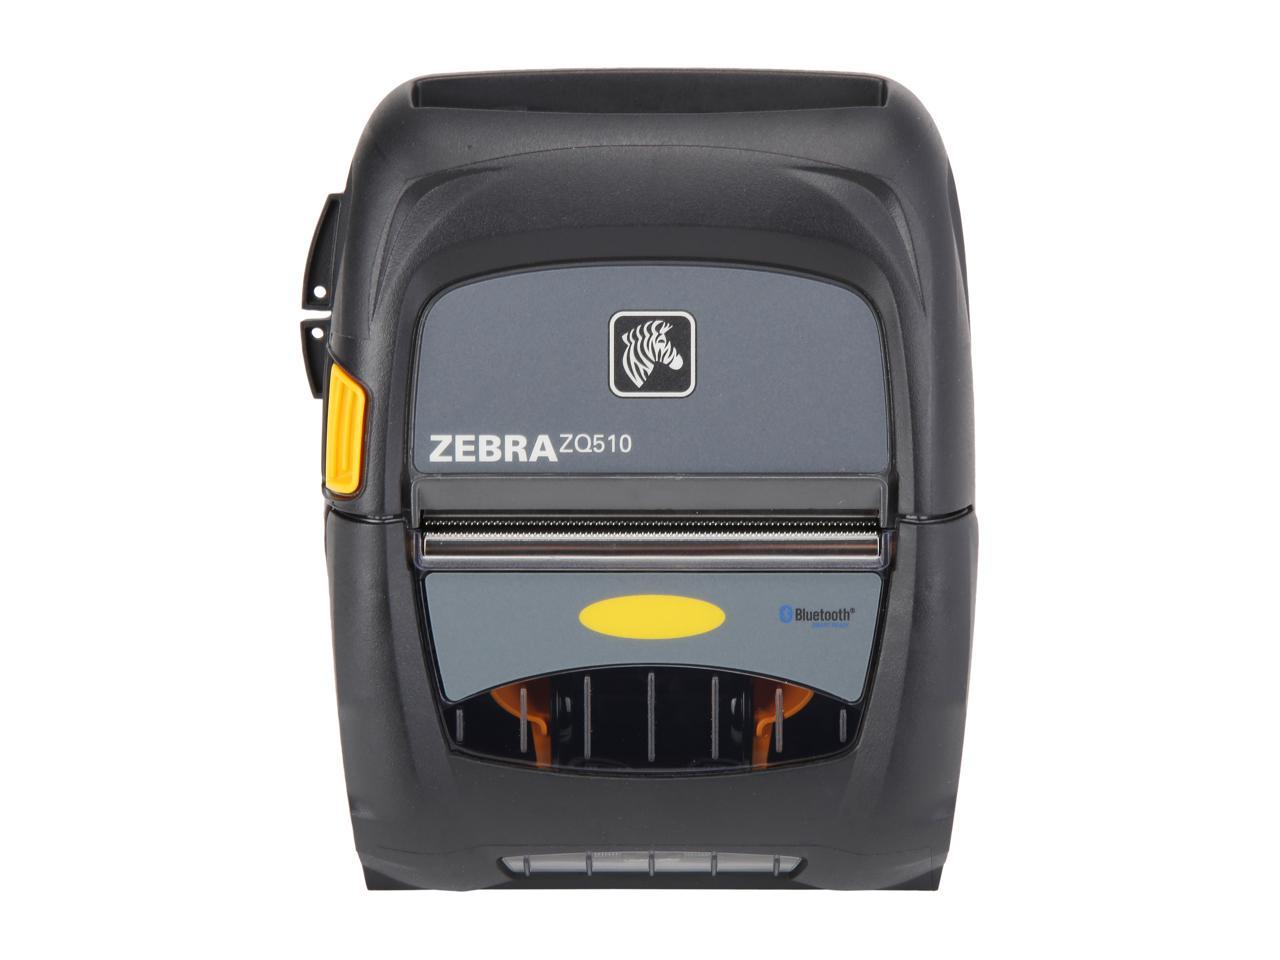 Zebra Zq510 3 Mobile Direct Thermal Receipt And Label Printer 203 Dpi Bluetooth 40 Linered 3653